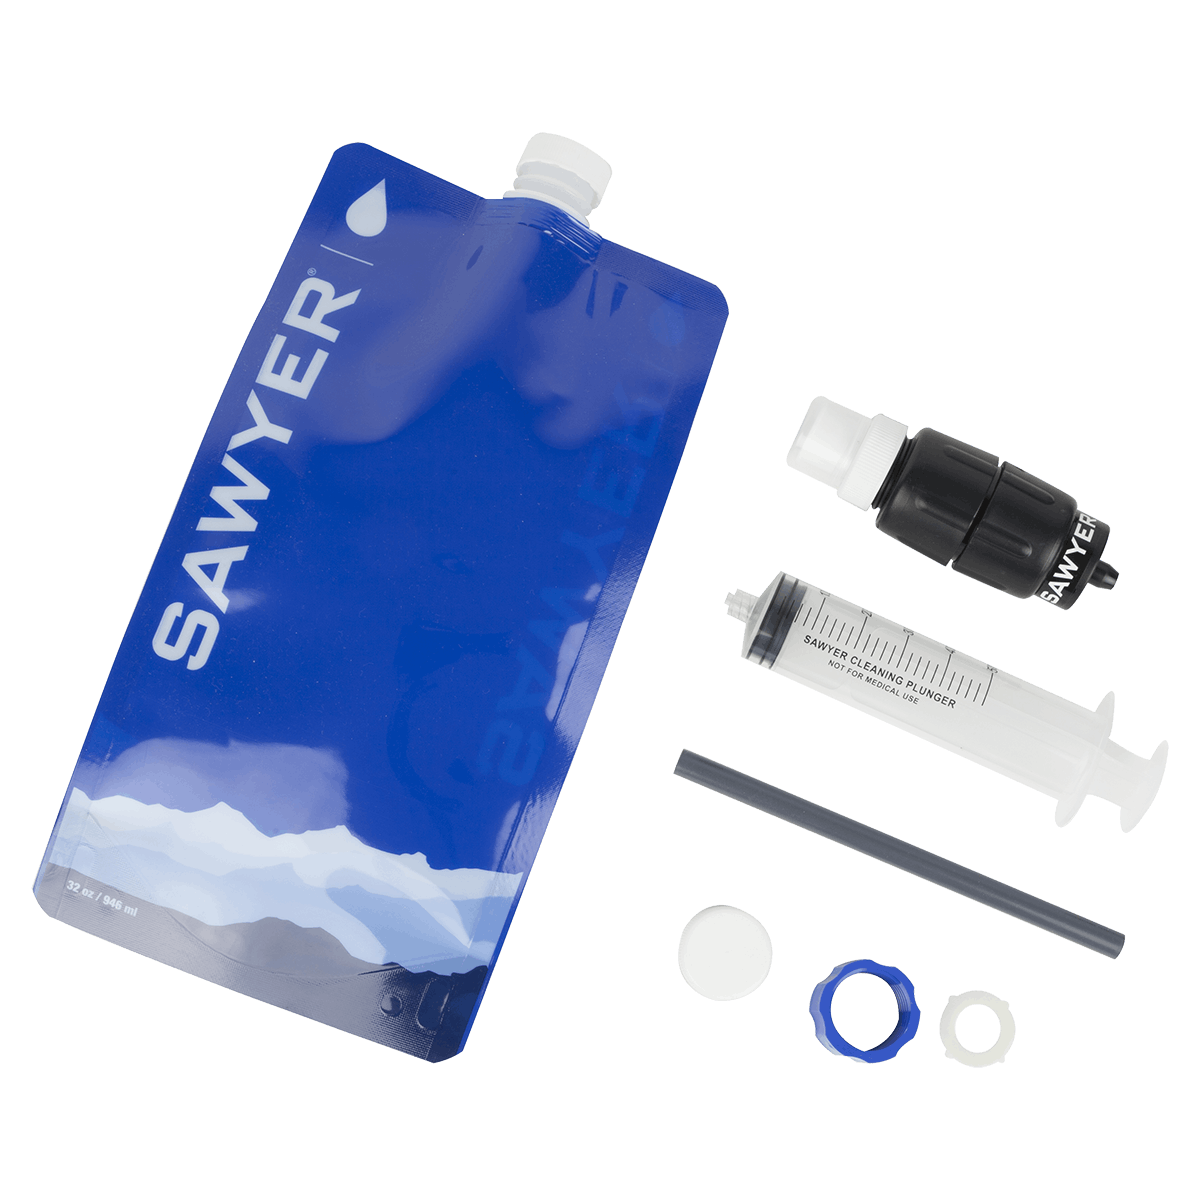 Sawyer - Micro Squeeze Water Filter